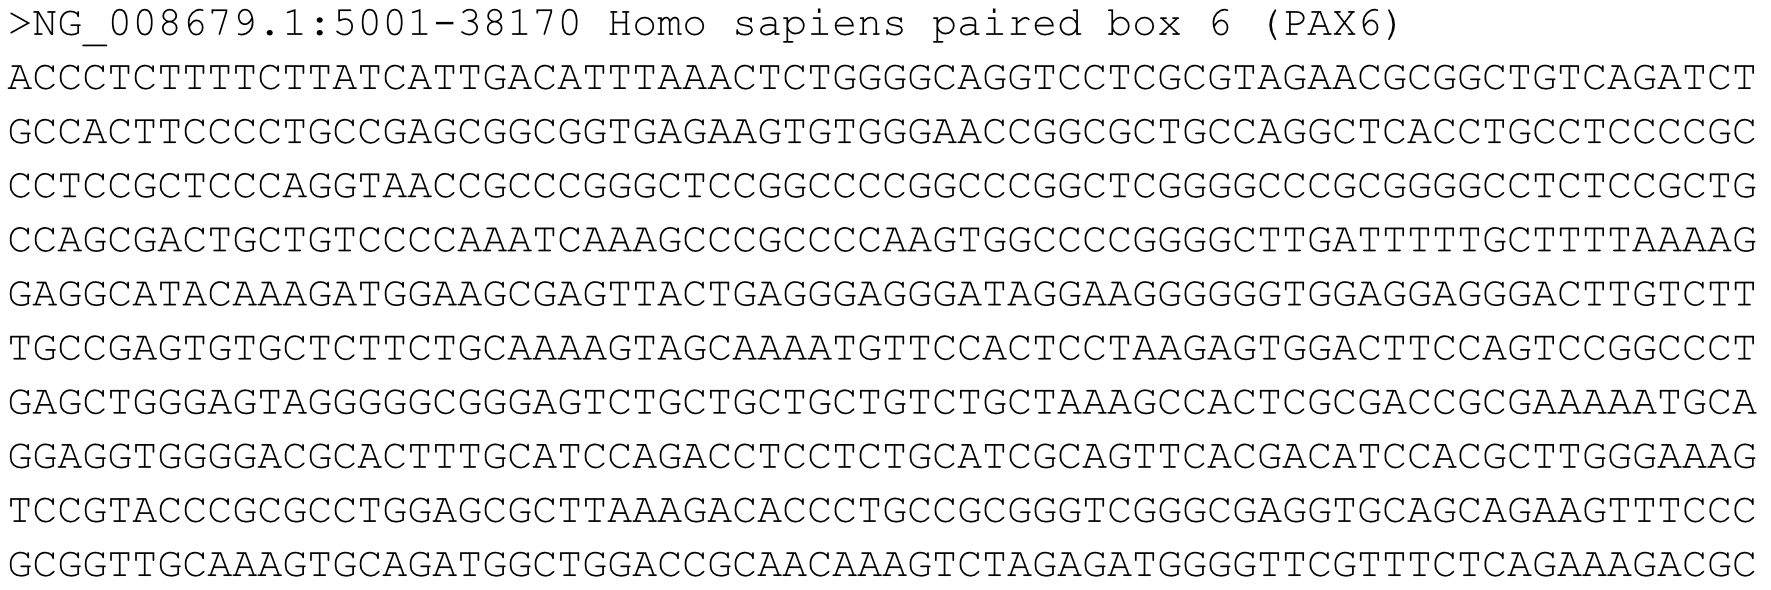 An example fasta file showing the first part of the PAX6 gene.